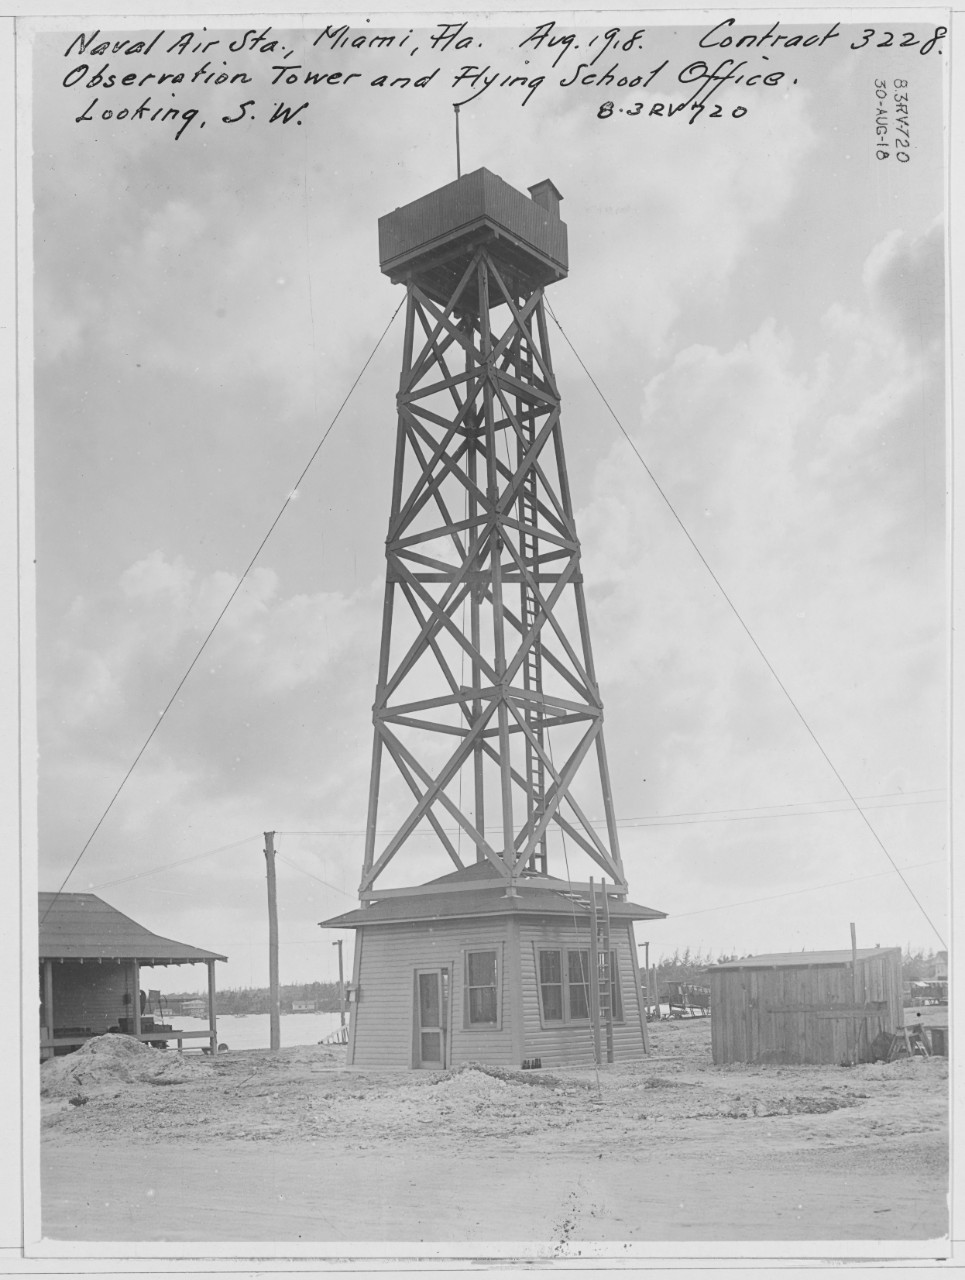 Observation tower and flying school office, Naval Air Station Miami, Florida.